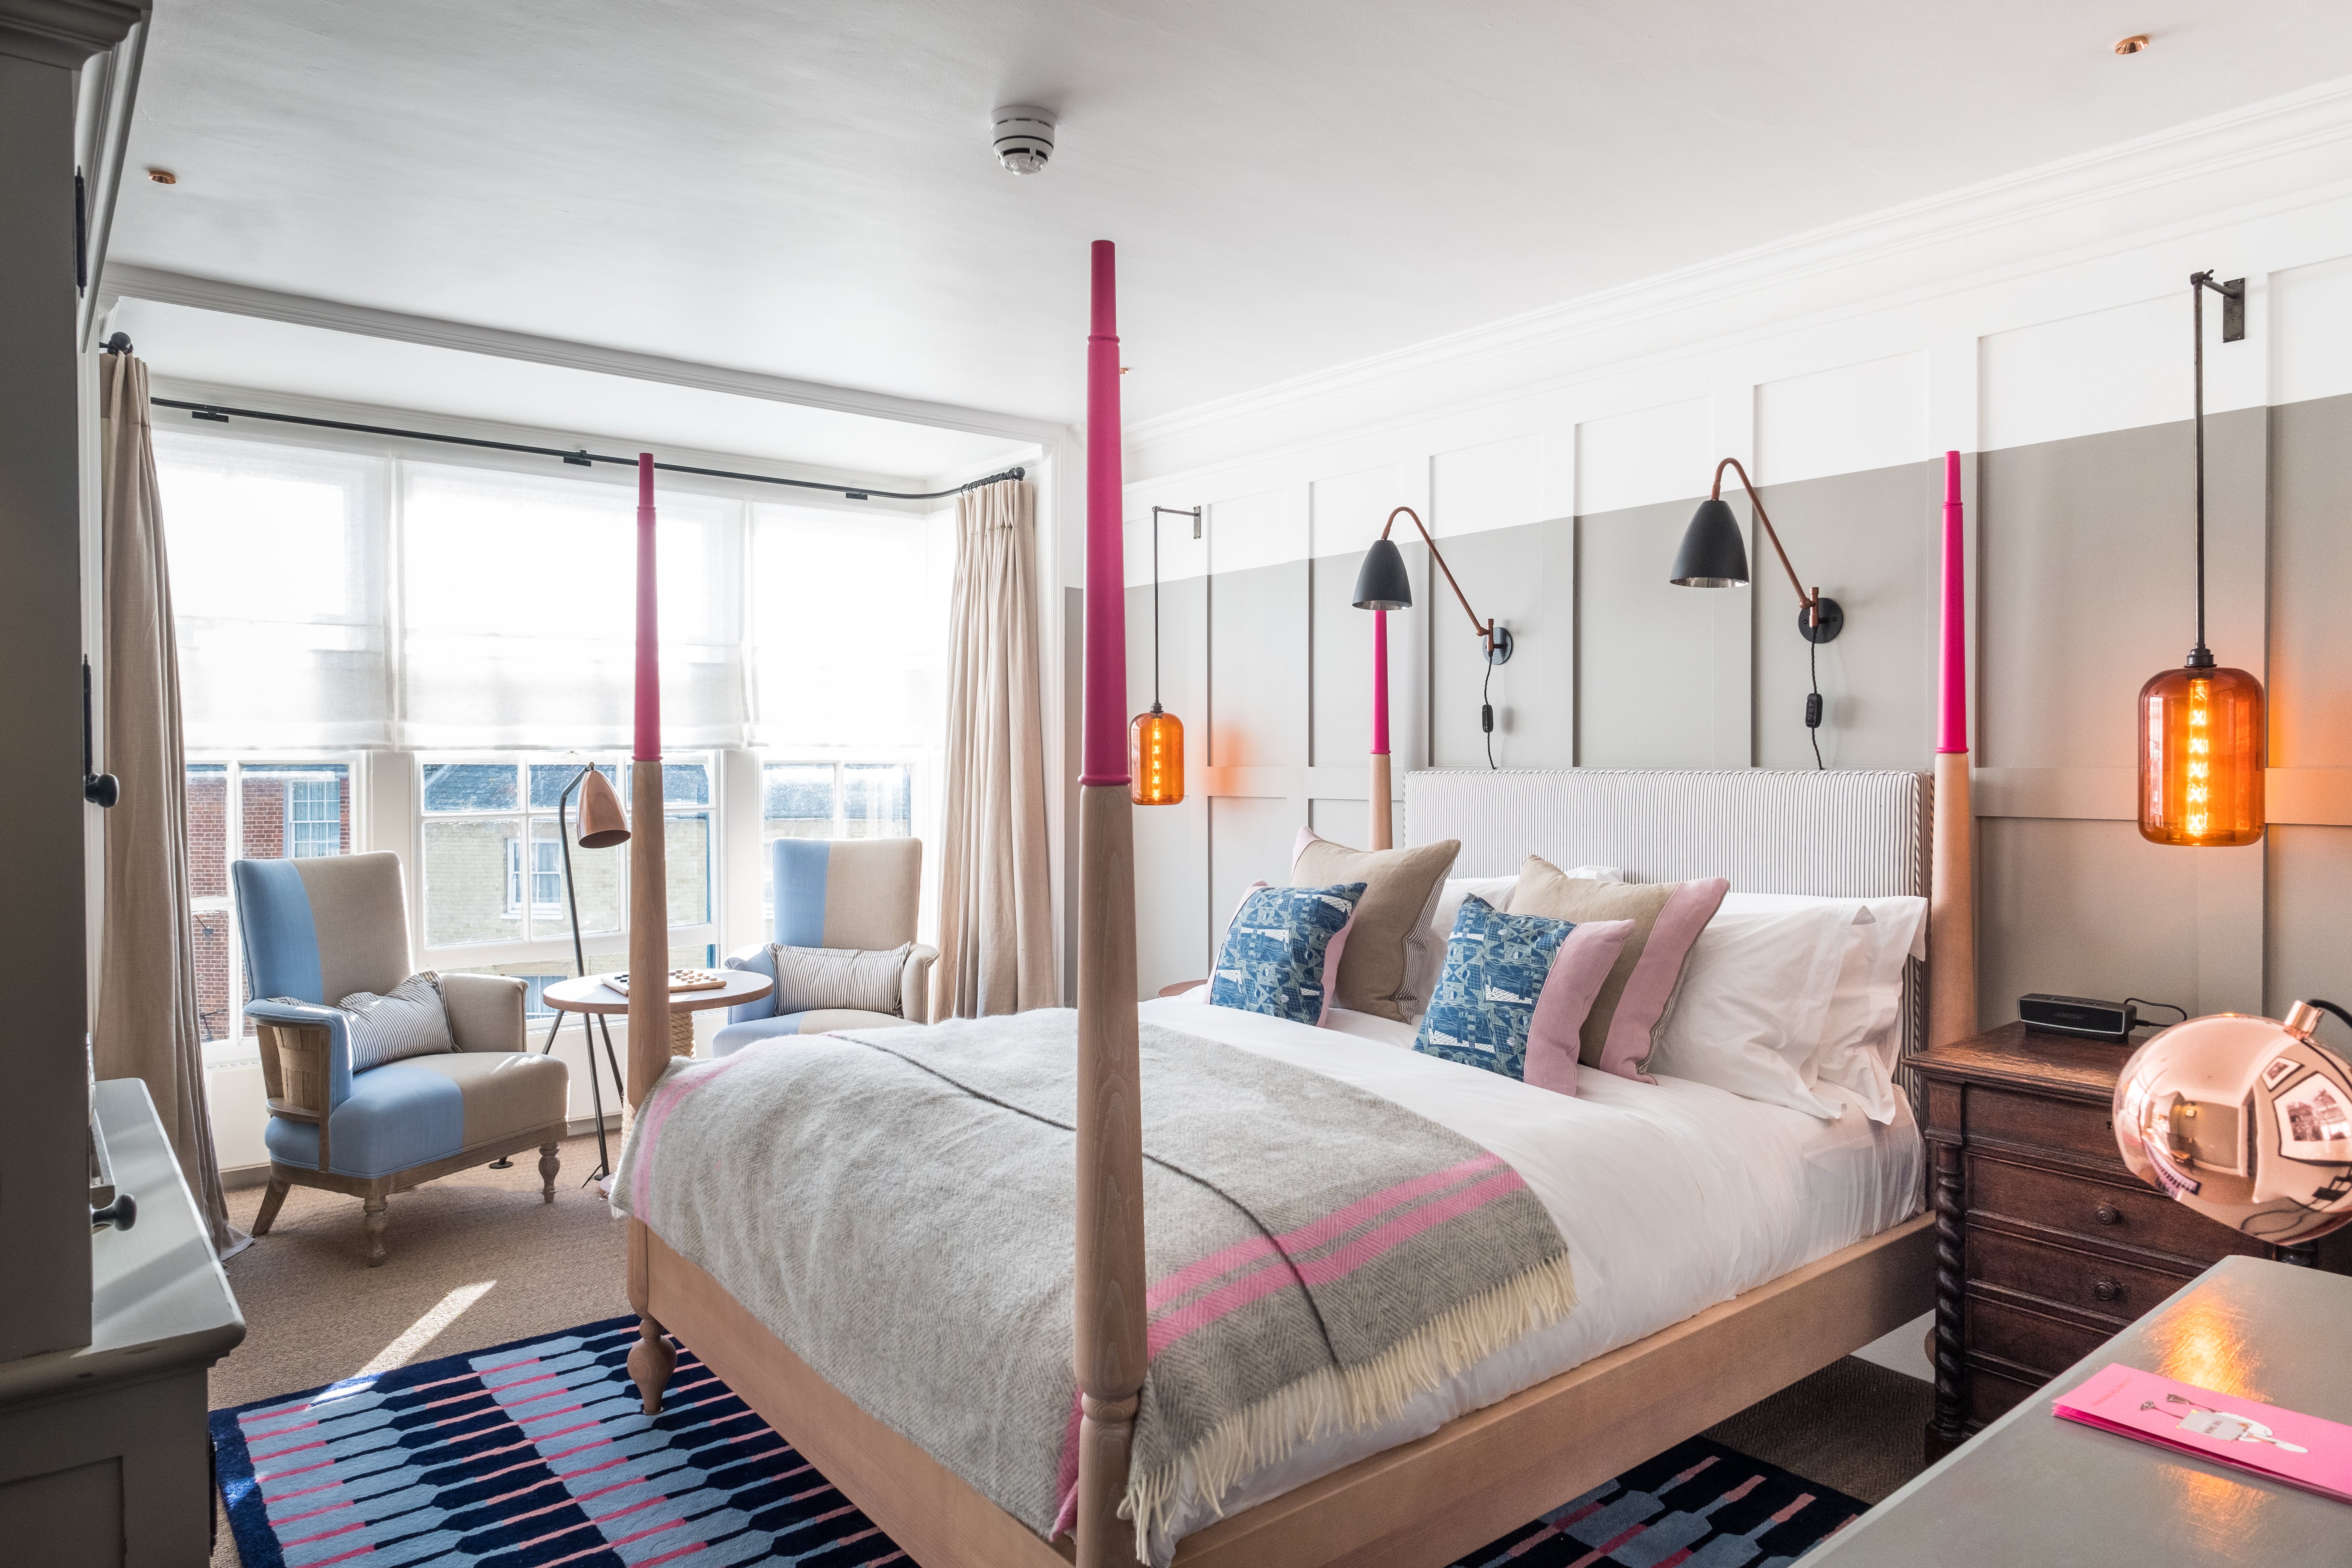 What better way to enjoy Suffolk than to sleep in a sea-facing suite?